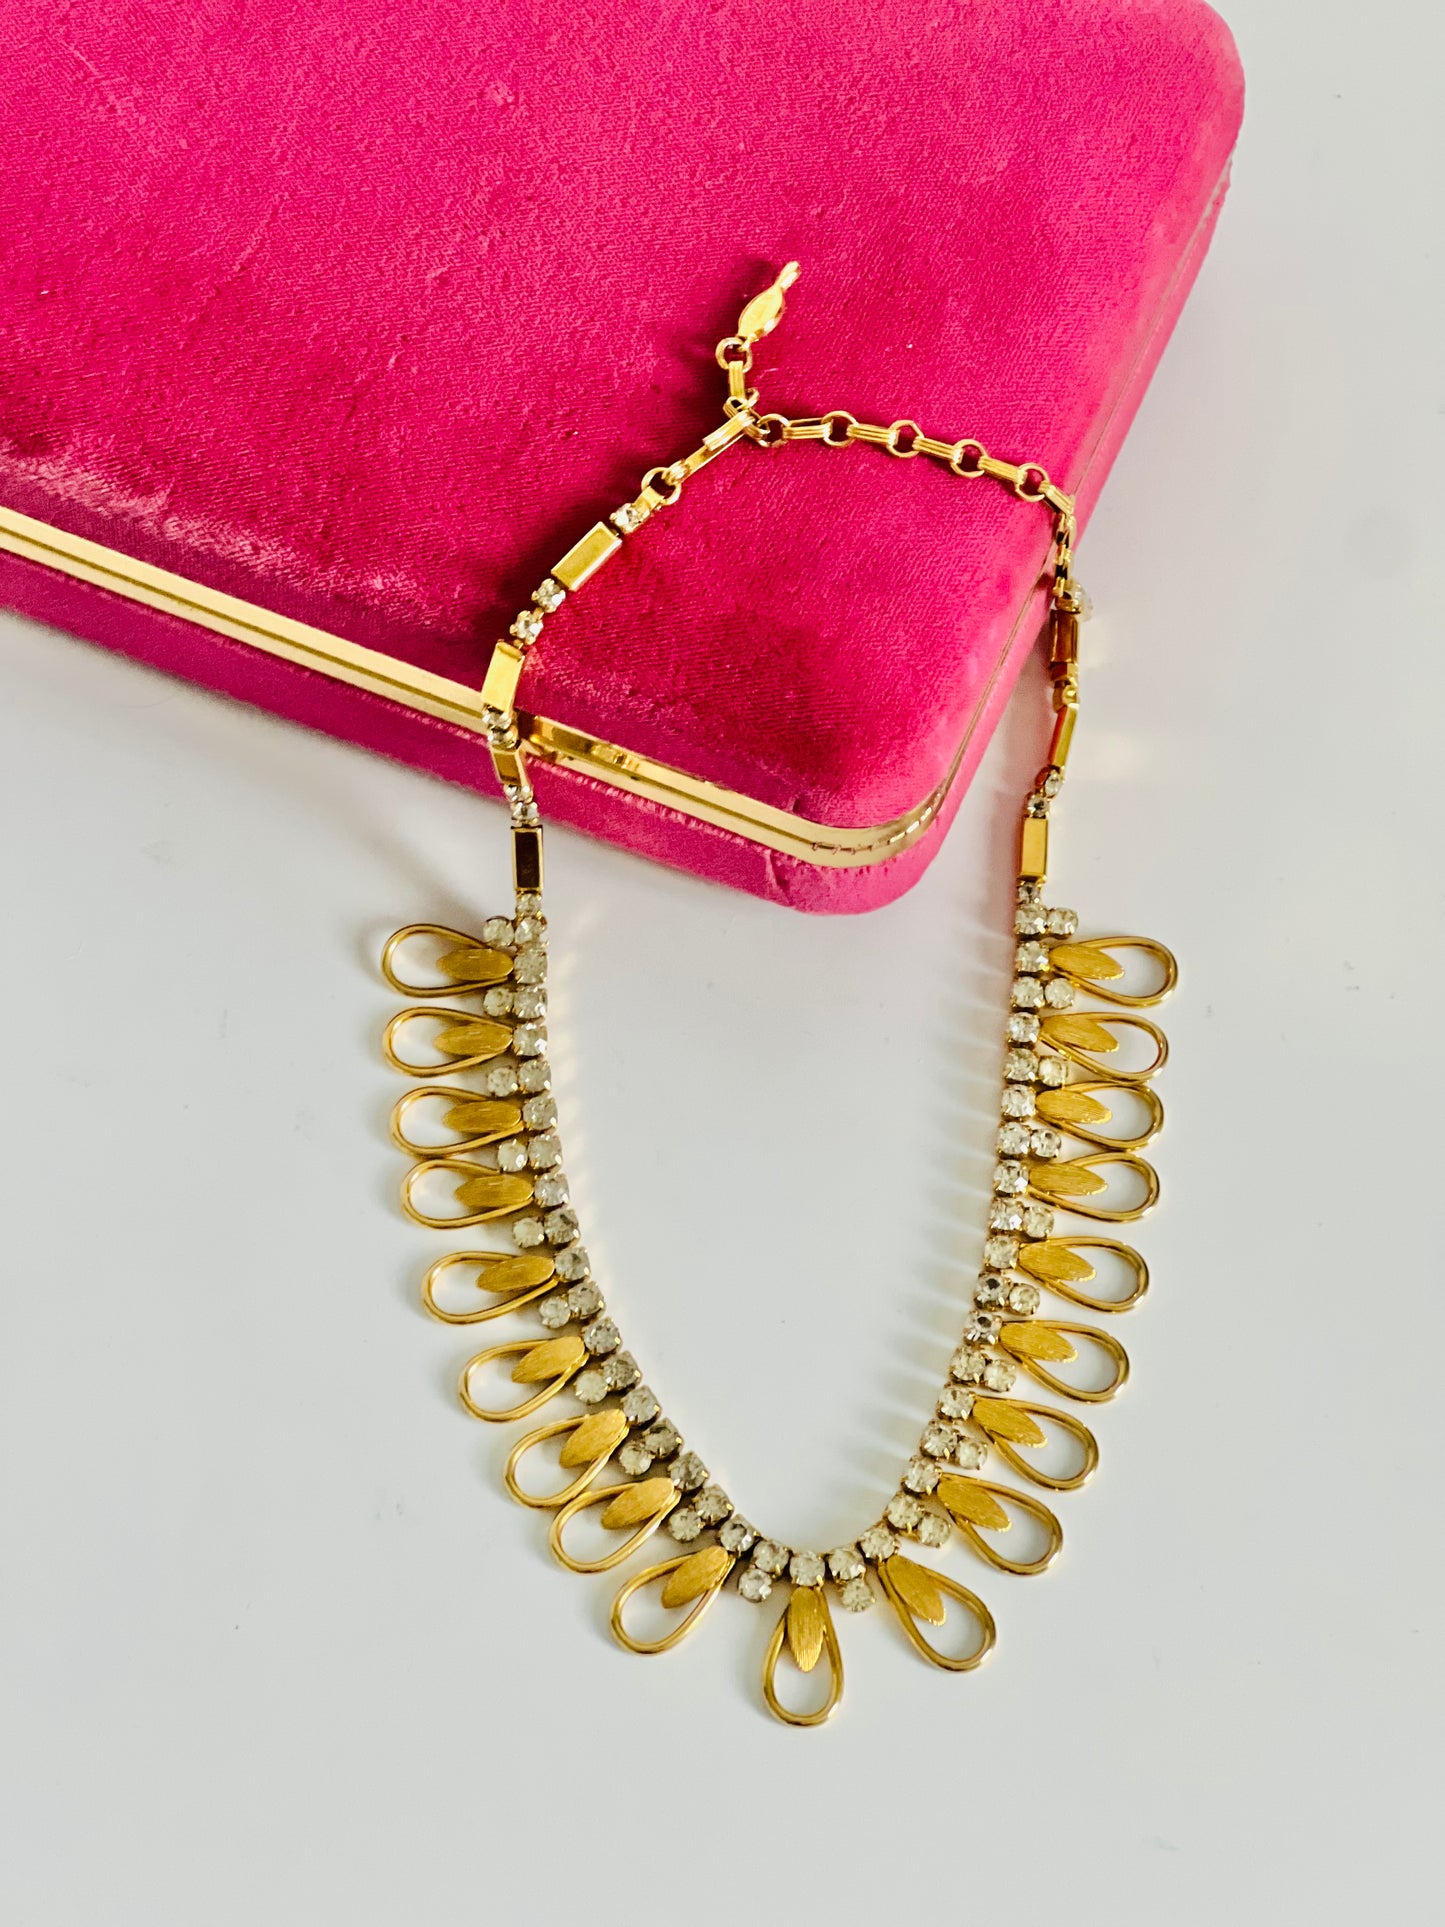 Vintage Rhinestone and Brushed Gold Midcentury Sarah Coventry Necklace